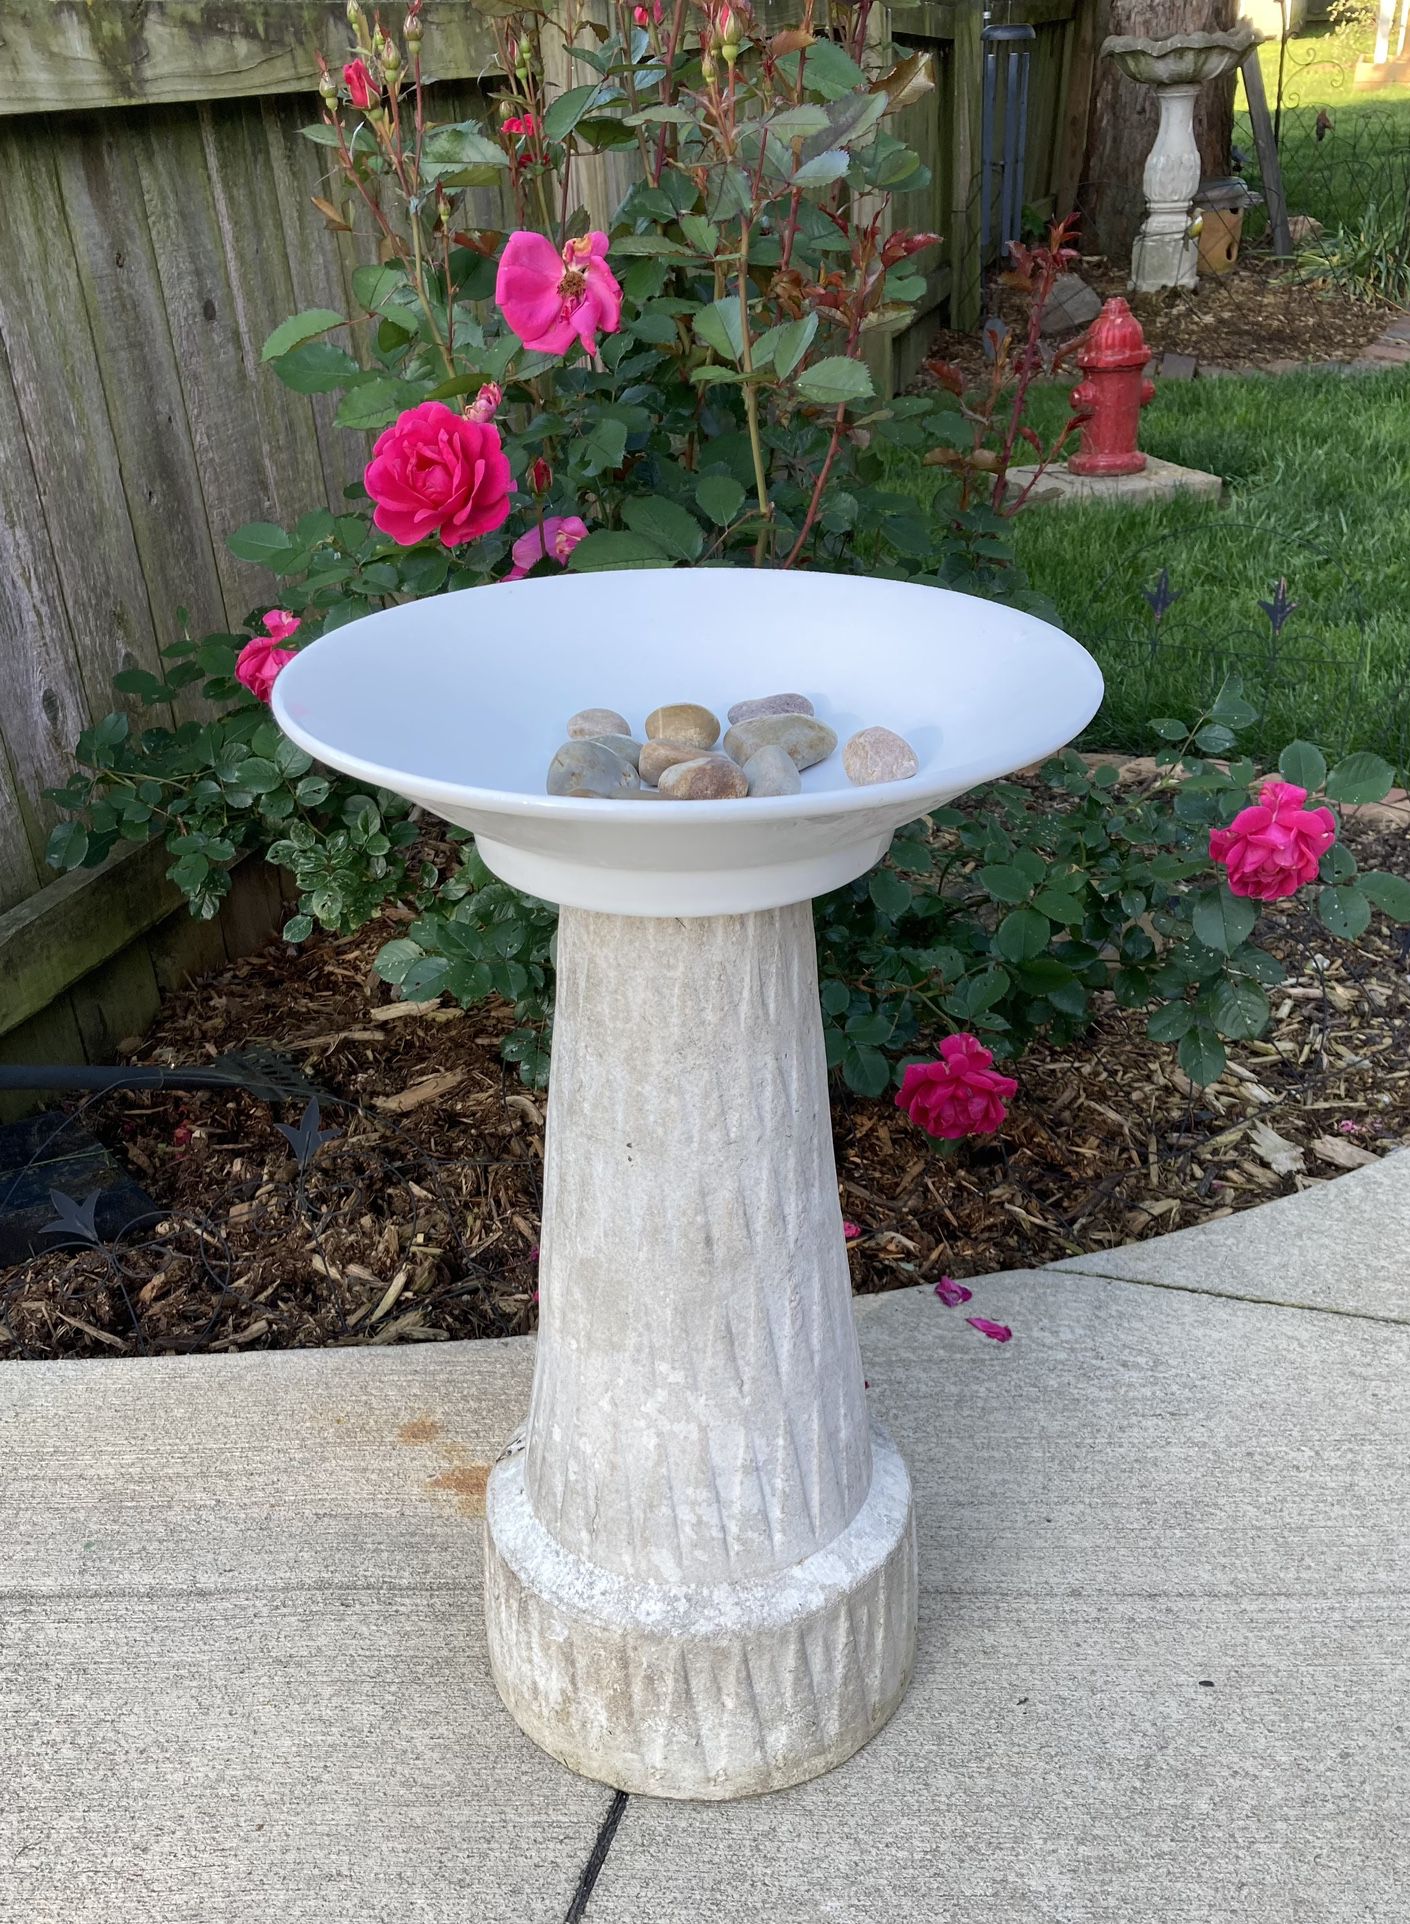 Heavy One of a Kind Bird Bath. The Birds Will Love It. Approximately 26” Tall.